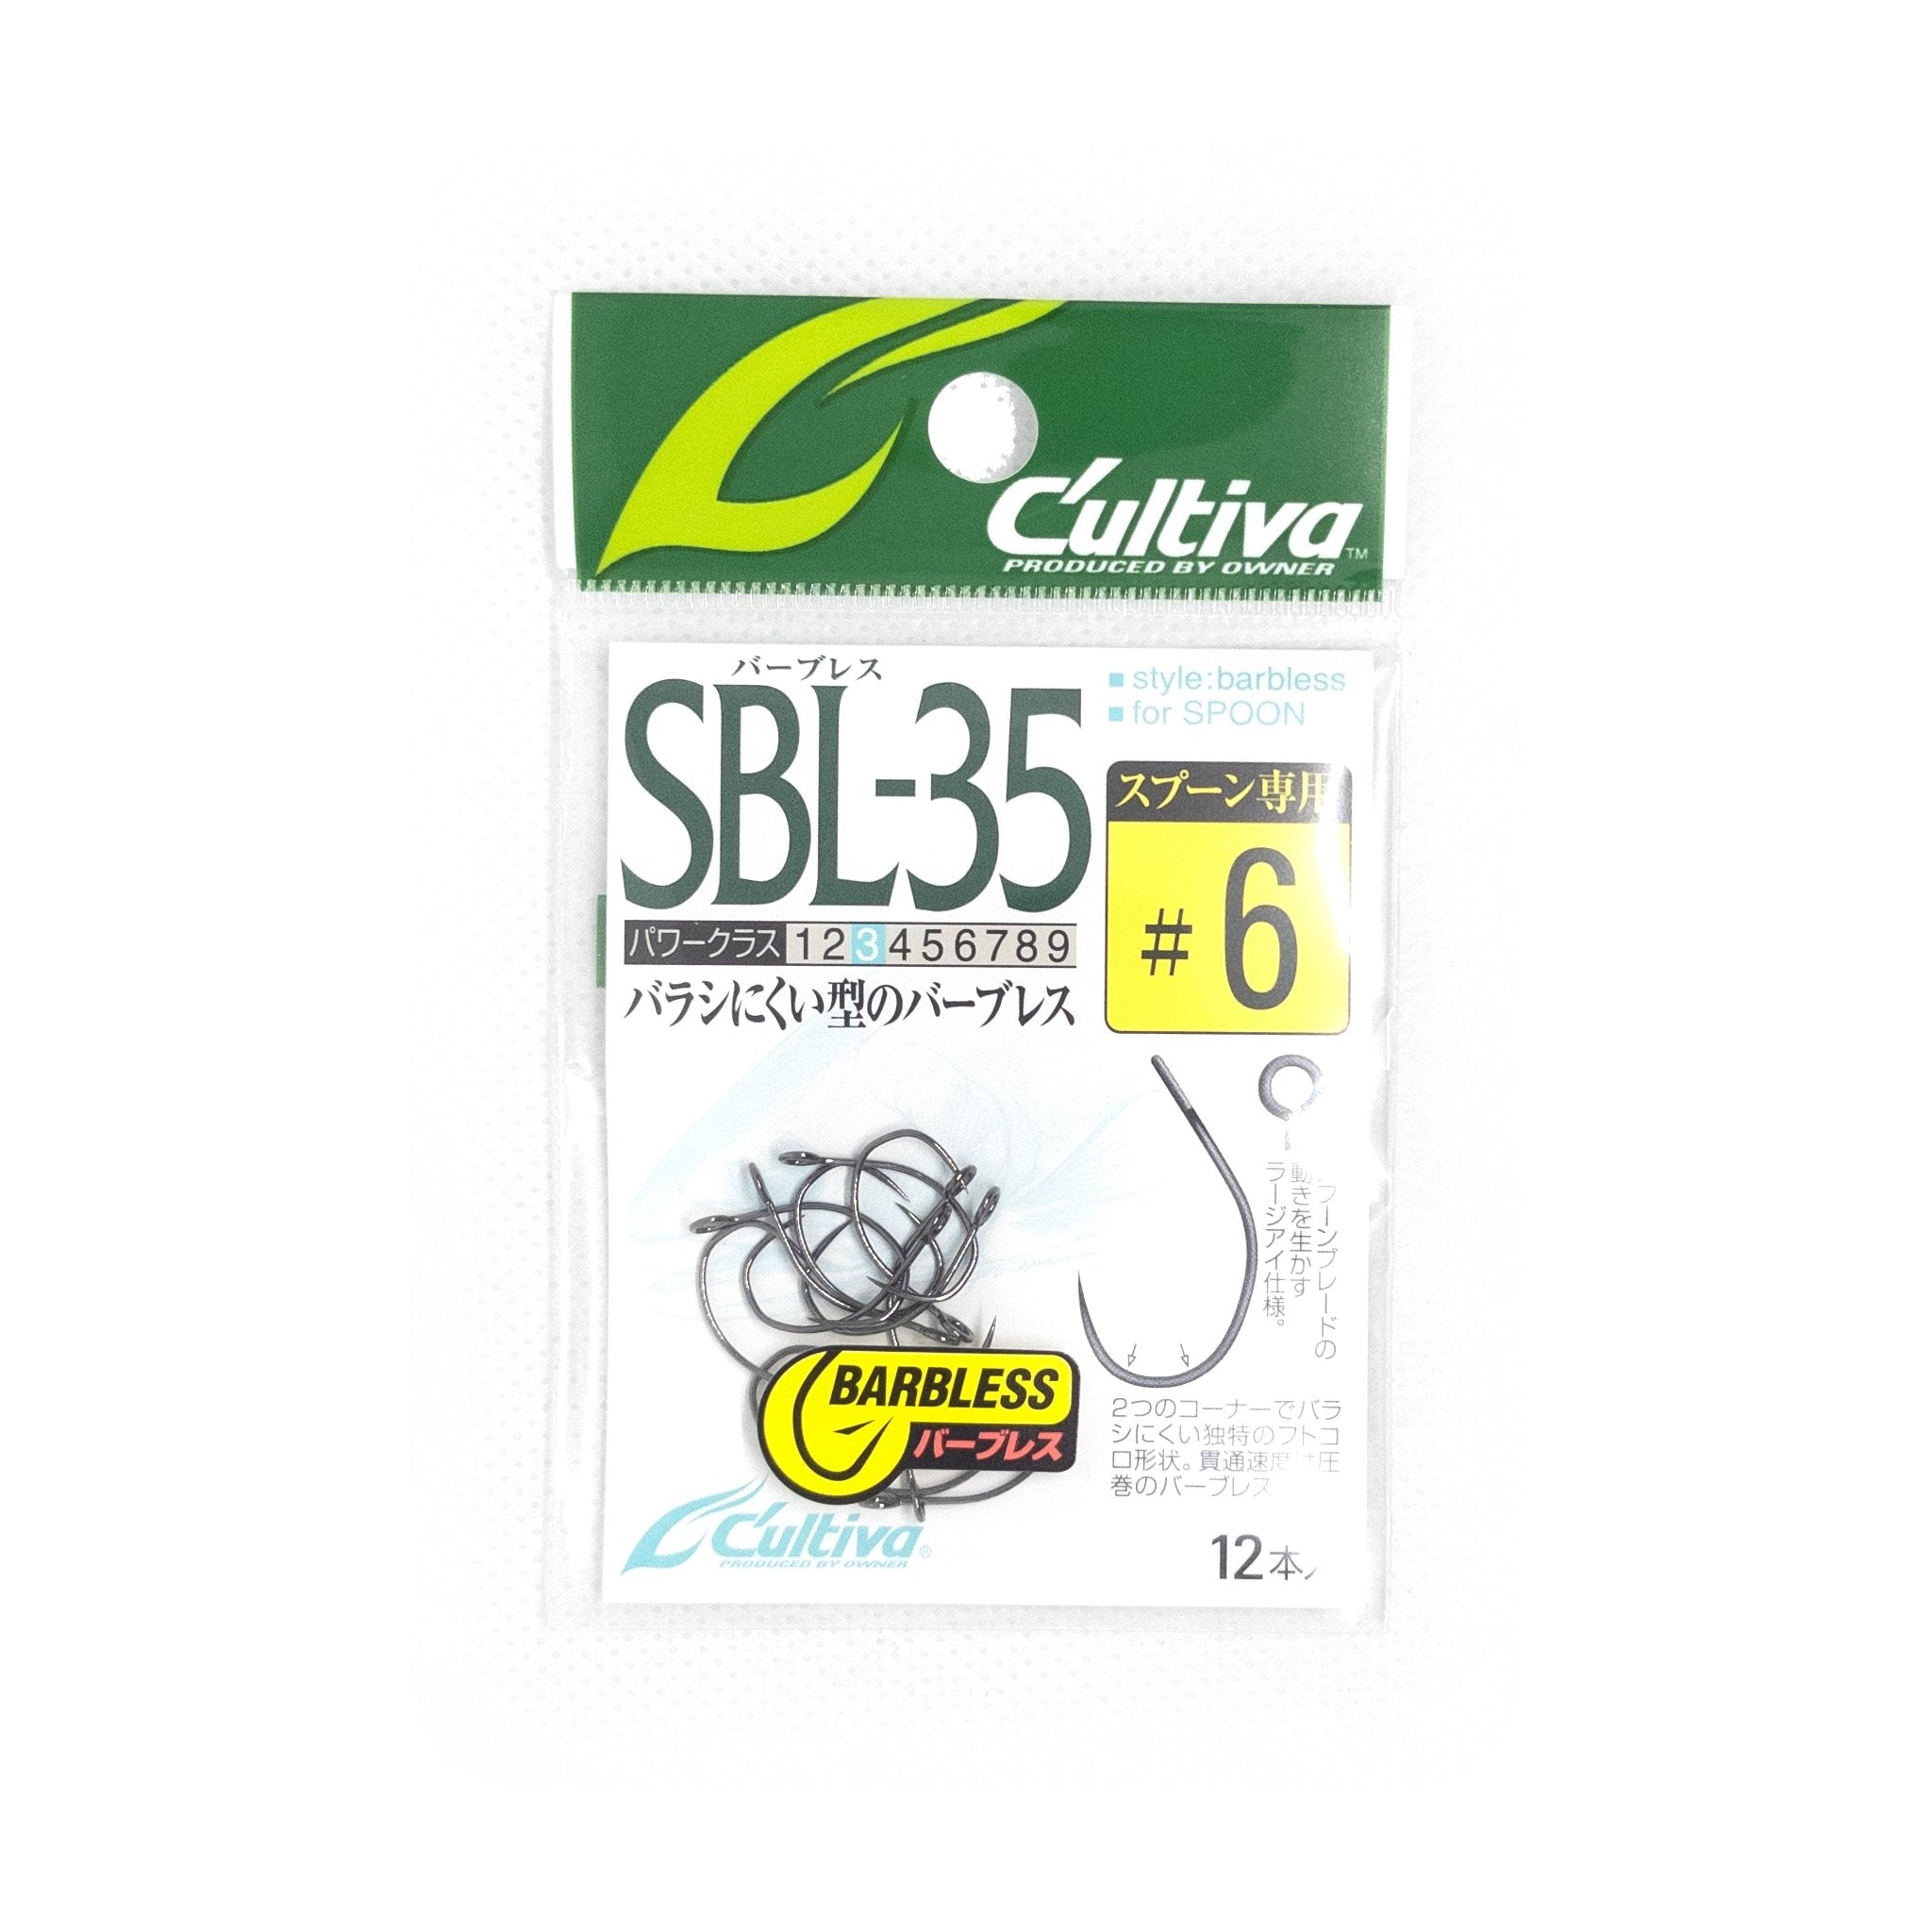 C'ultiva SBL-35 #6 Barbless Hook - The Borrowed Lure